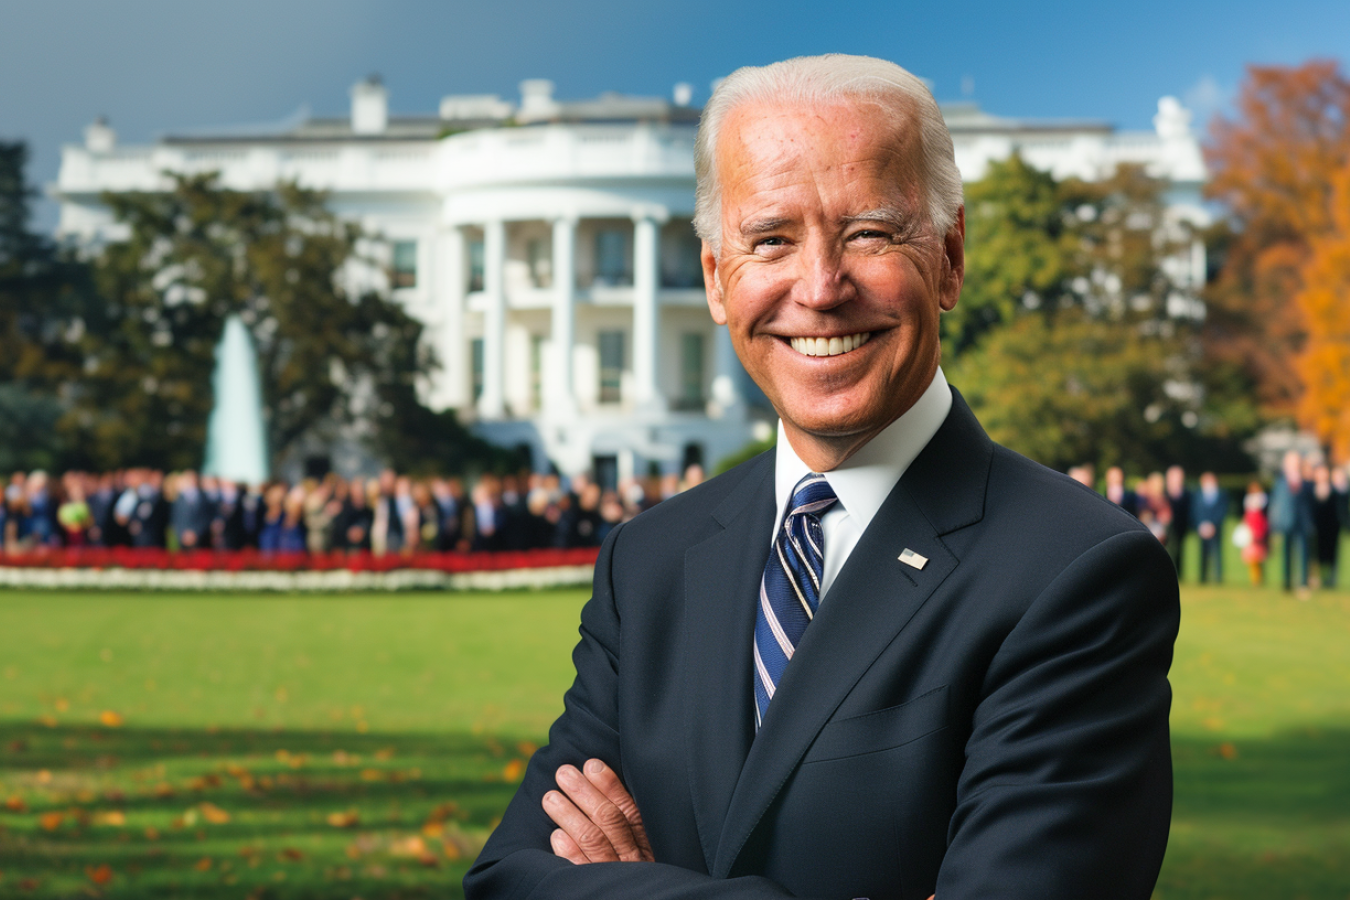 Biden's Immigration Policy: A New Era of Reform - Biden with Migrants near White House